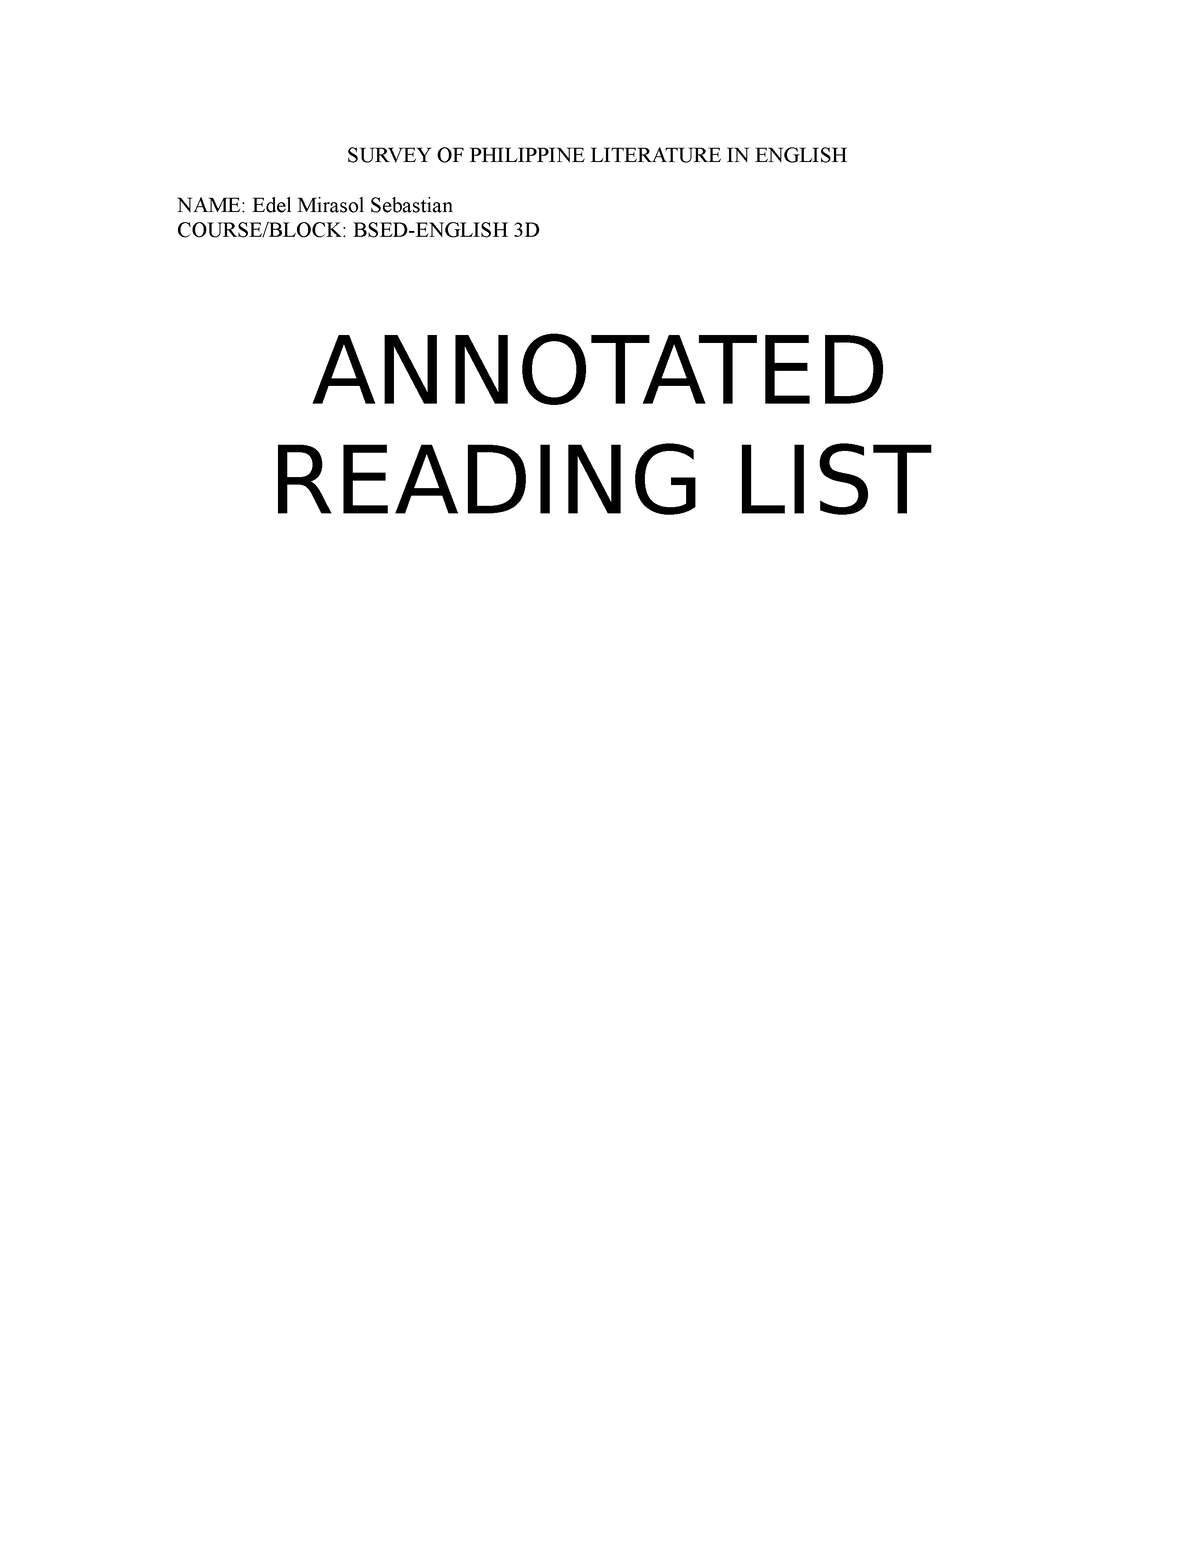 annotated reading list of philippine literature